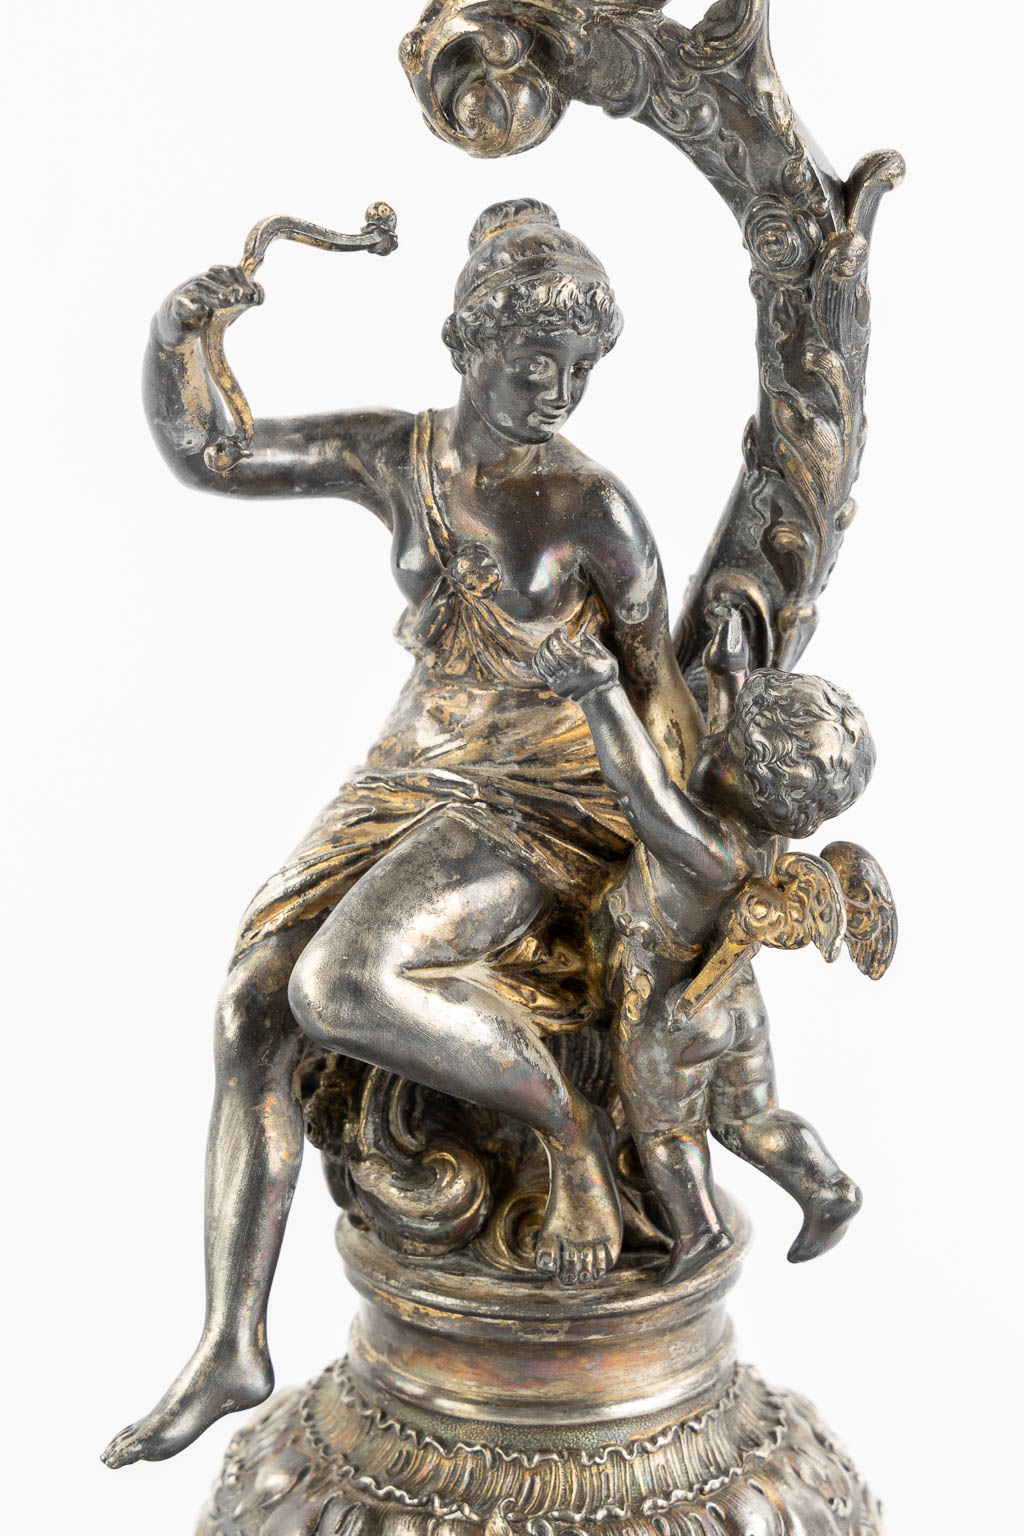 WMF, A large silver-plated candelabra, with an image of Cupid. (L:37 x W:37 x H:57 cm)